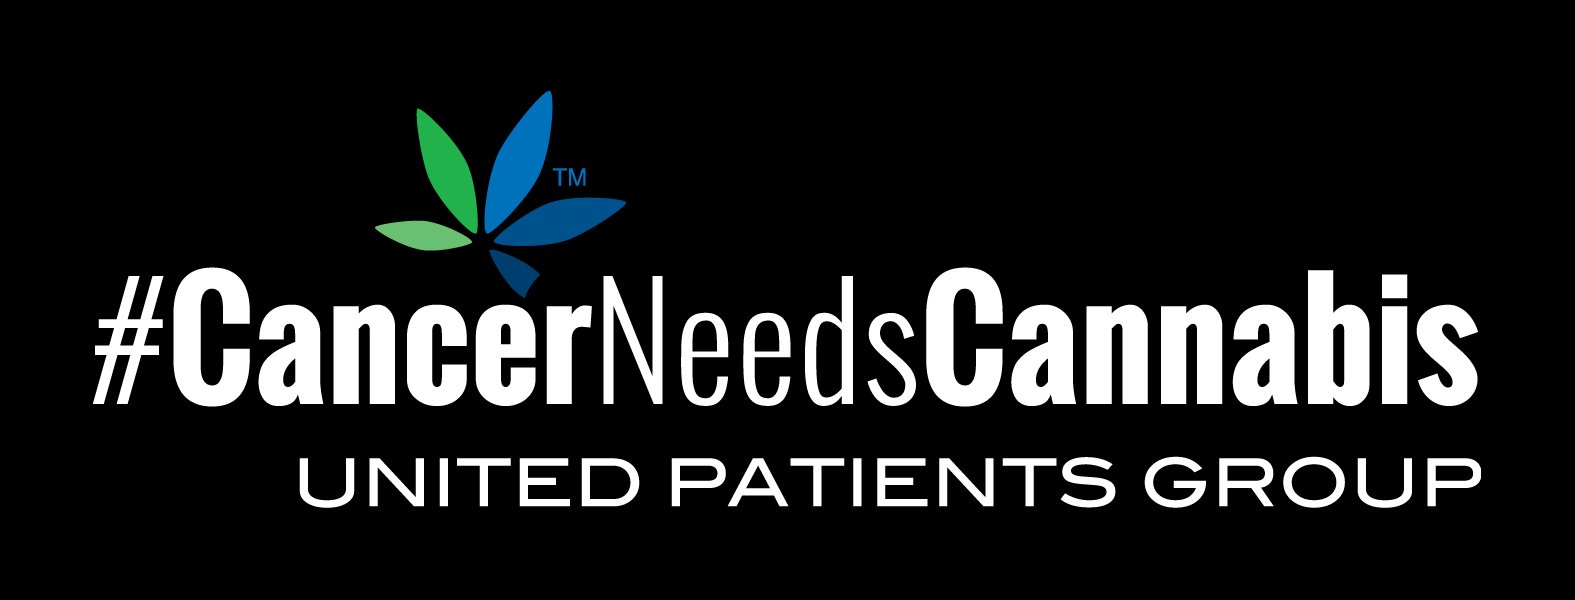 National Cancer Moonshot Initiative: An Open Letter and Video From United Patients Group and the Medical Cannabis Community to VP Biden